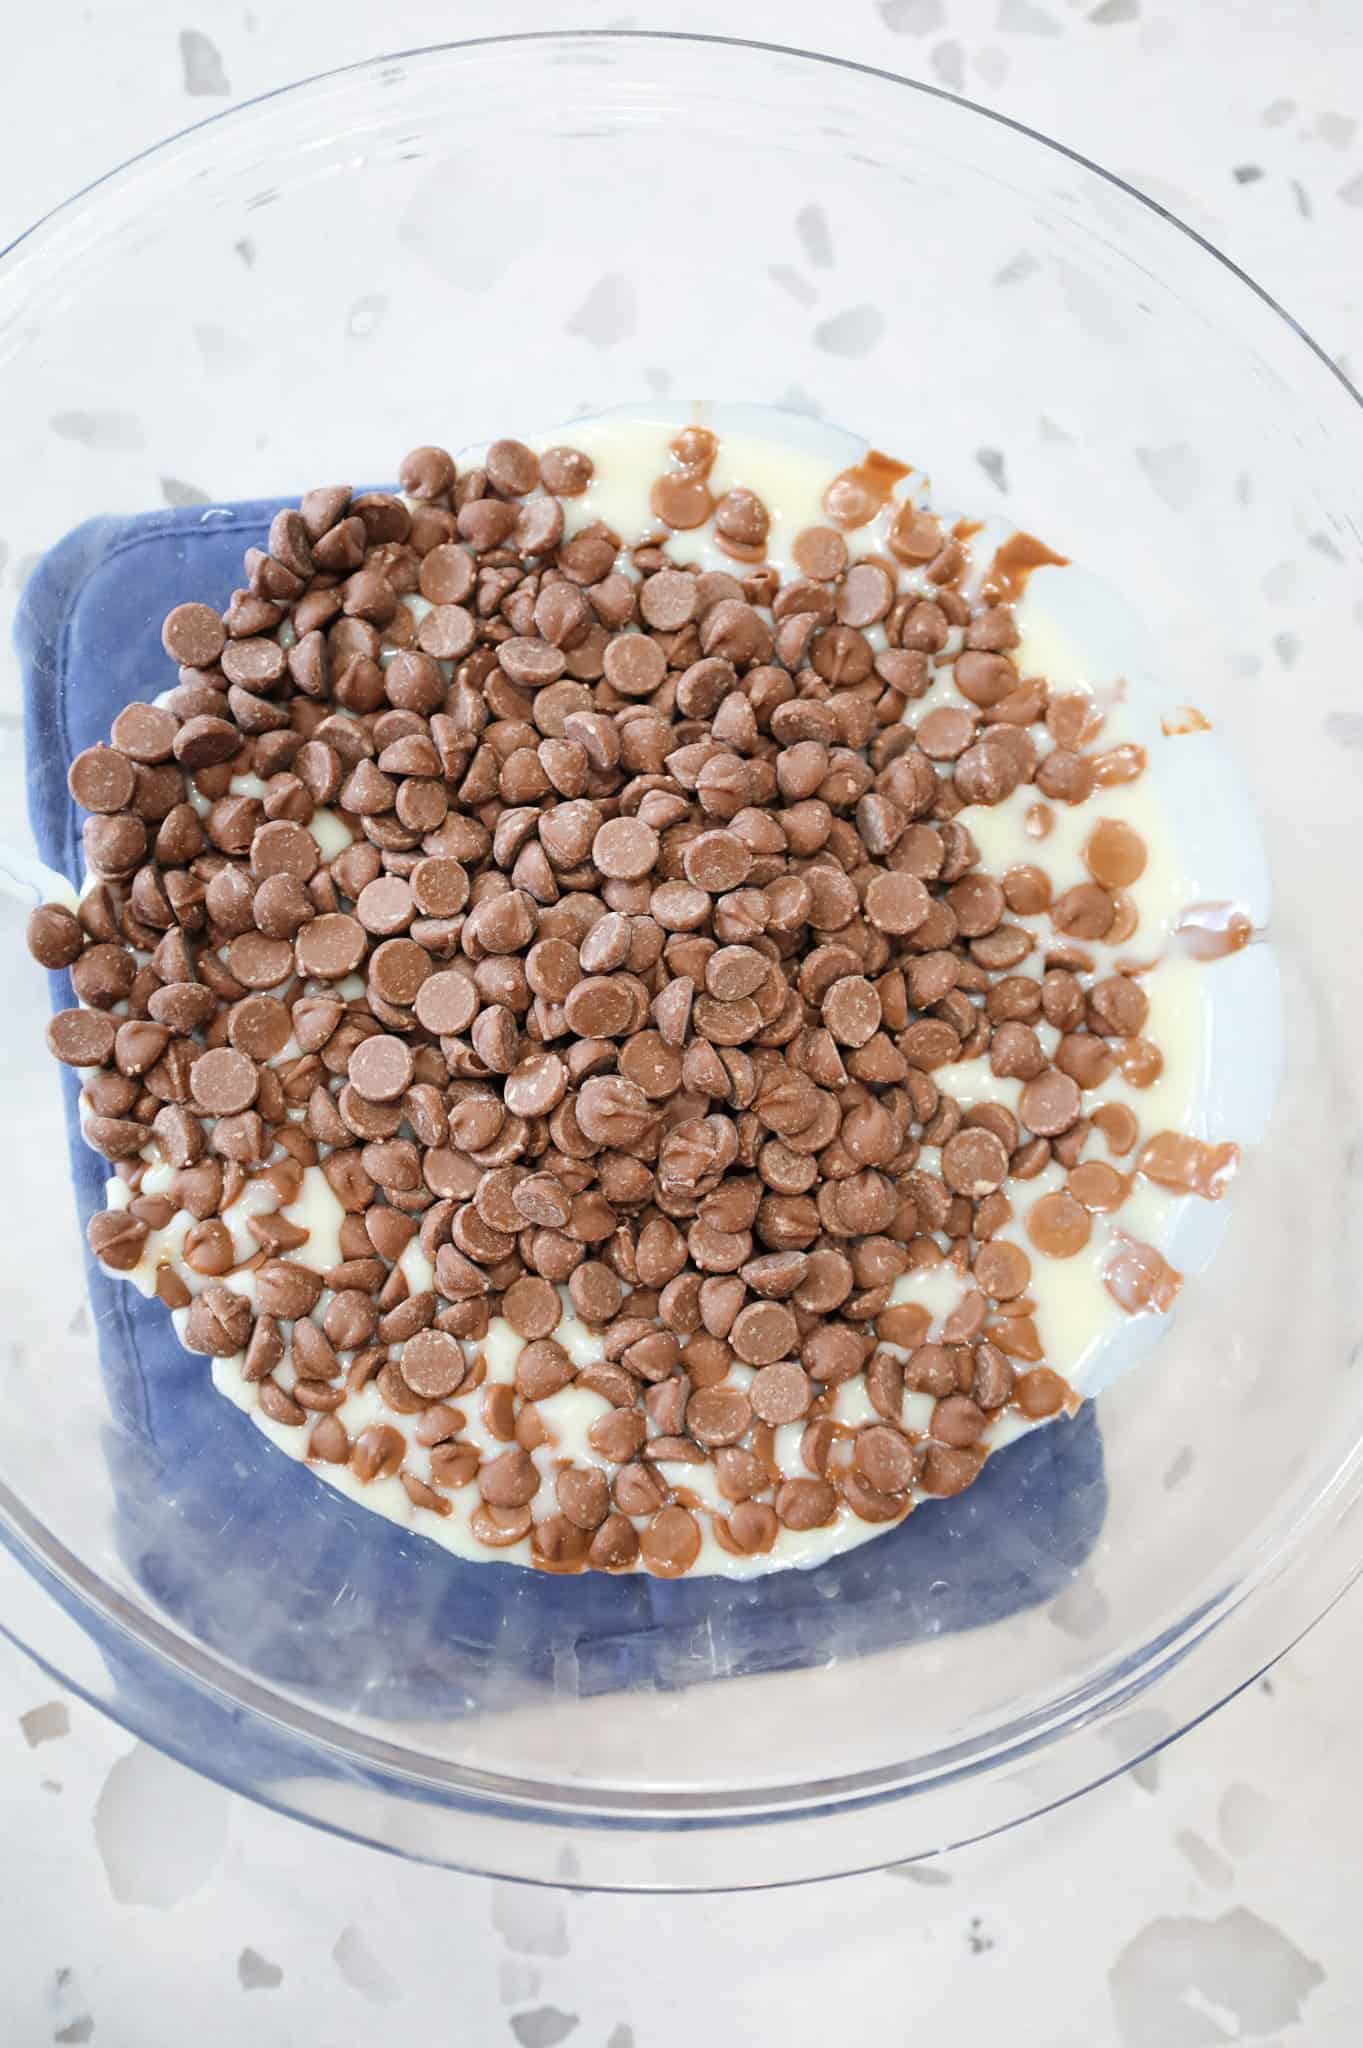 milk chocolate chips and sweetened condensed milk in a bowl after microwaving